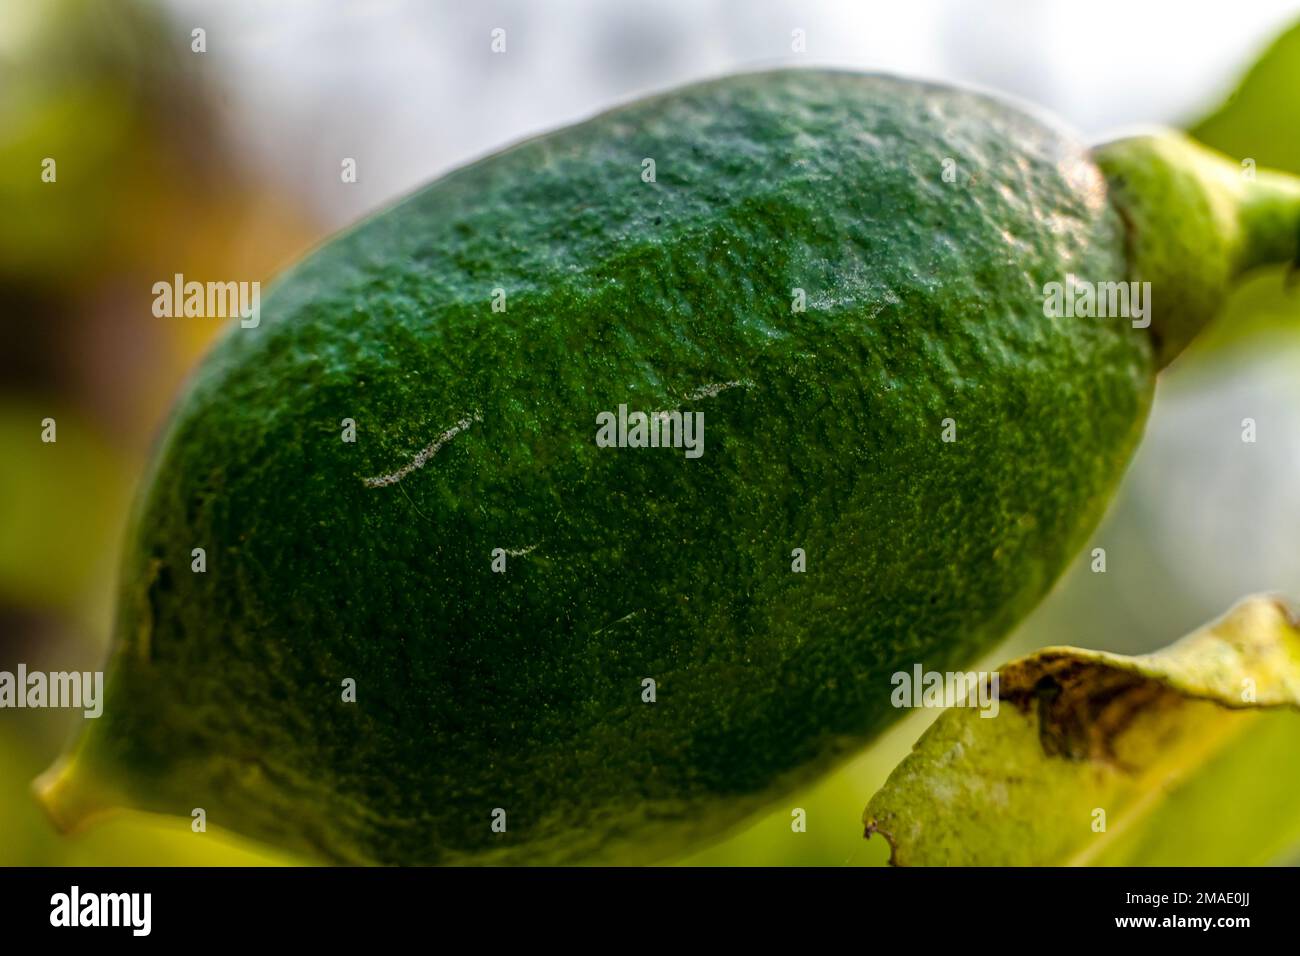 A lemon hanging on the tree. The lemon (Citrus limon) is a species of small evergreen trees in the flowering plant family Rutaceae. Stock Photo